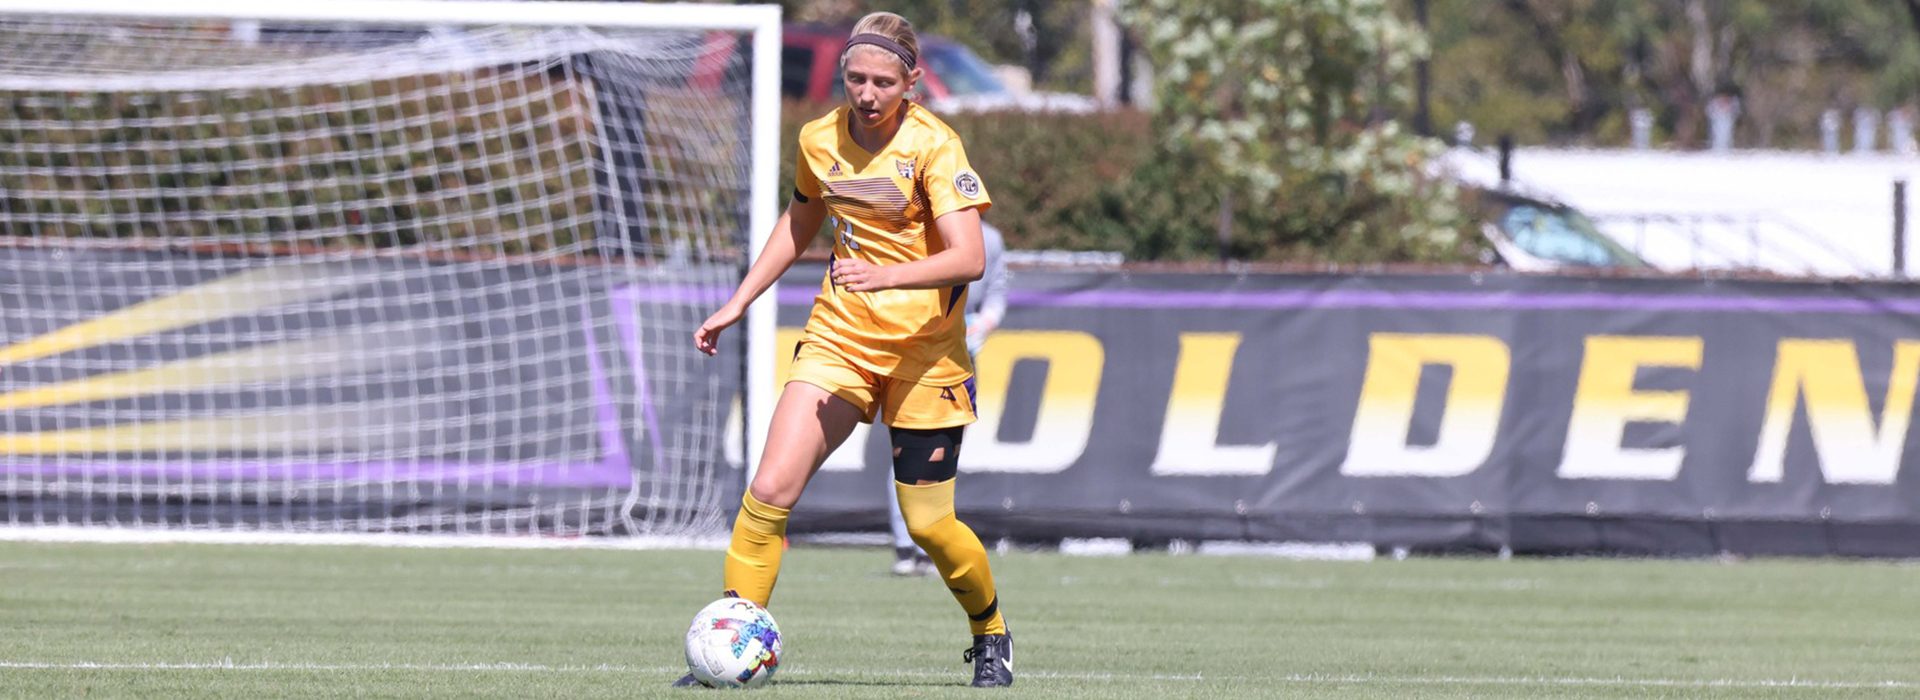 Tech soccer travels to Morehead State with chance to clinch OVC regular-season title on Thursday